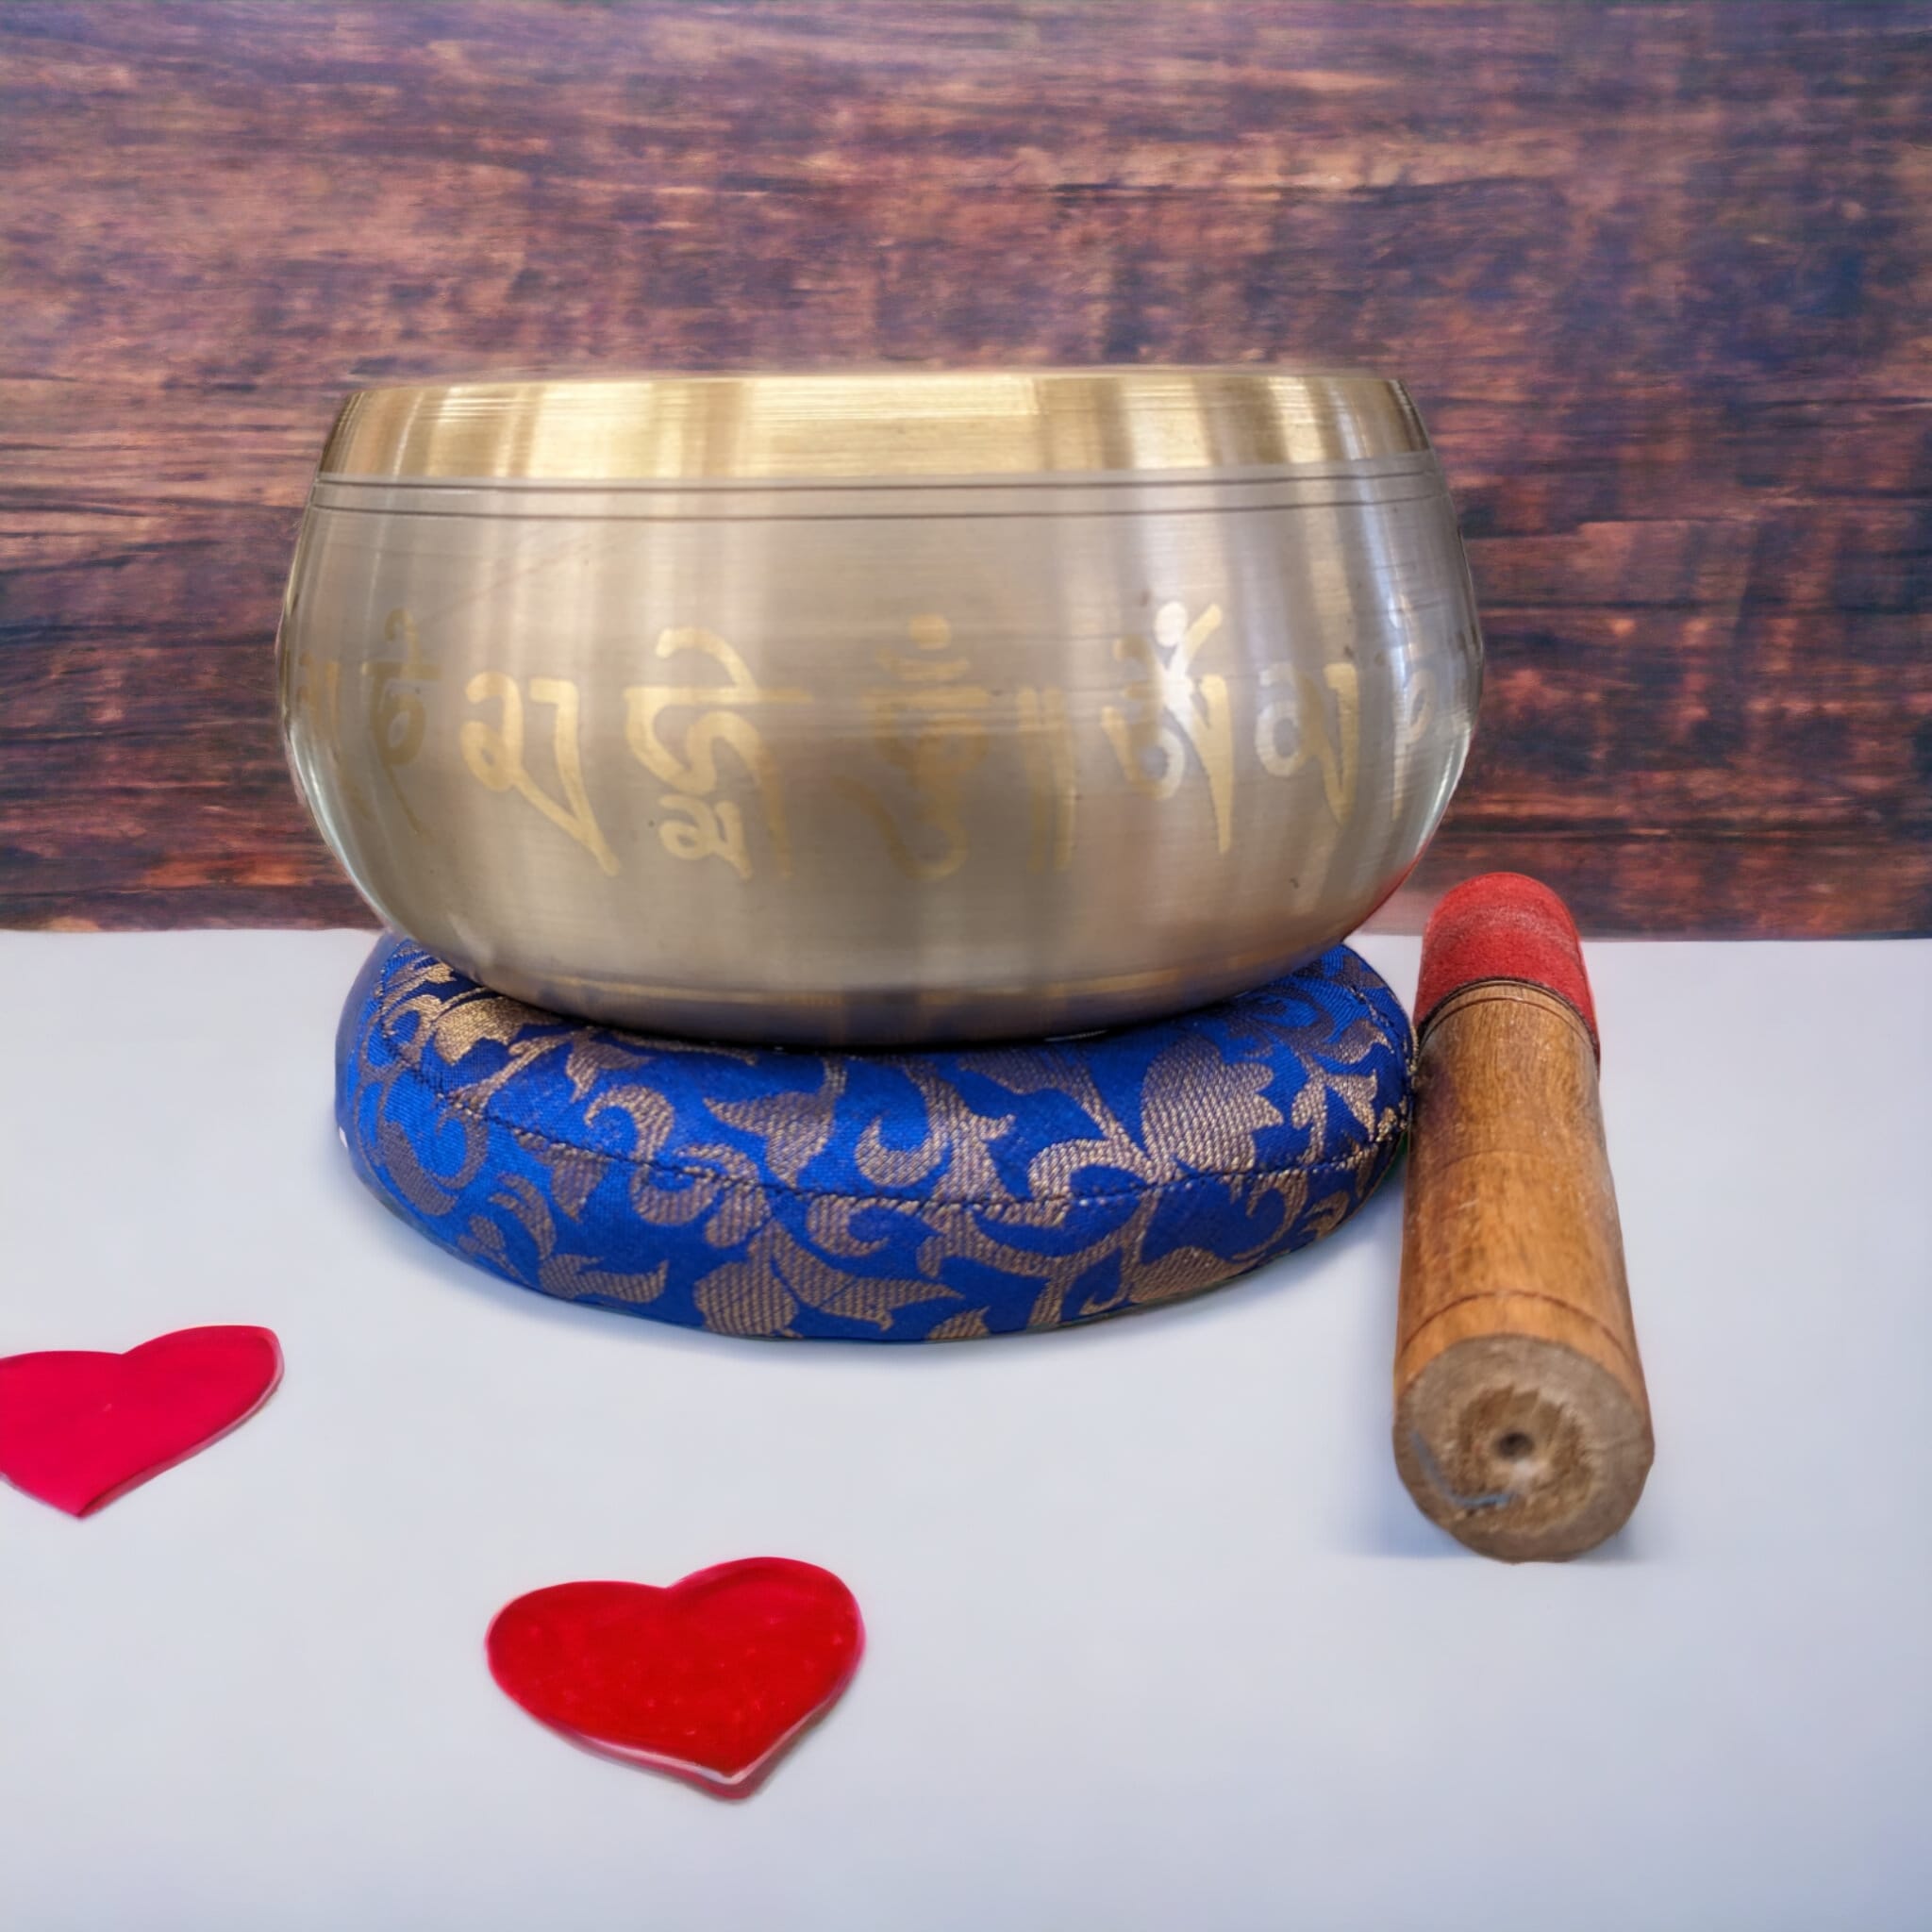 Image of a large tibetan singing bowl placed on a cushion with a wooden mallet besides it